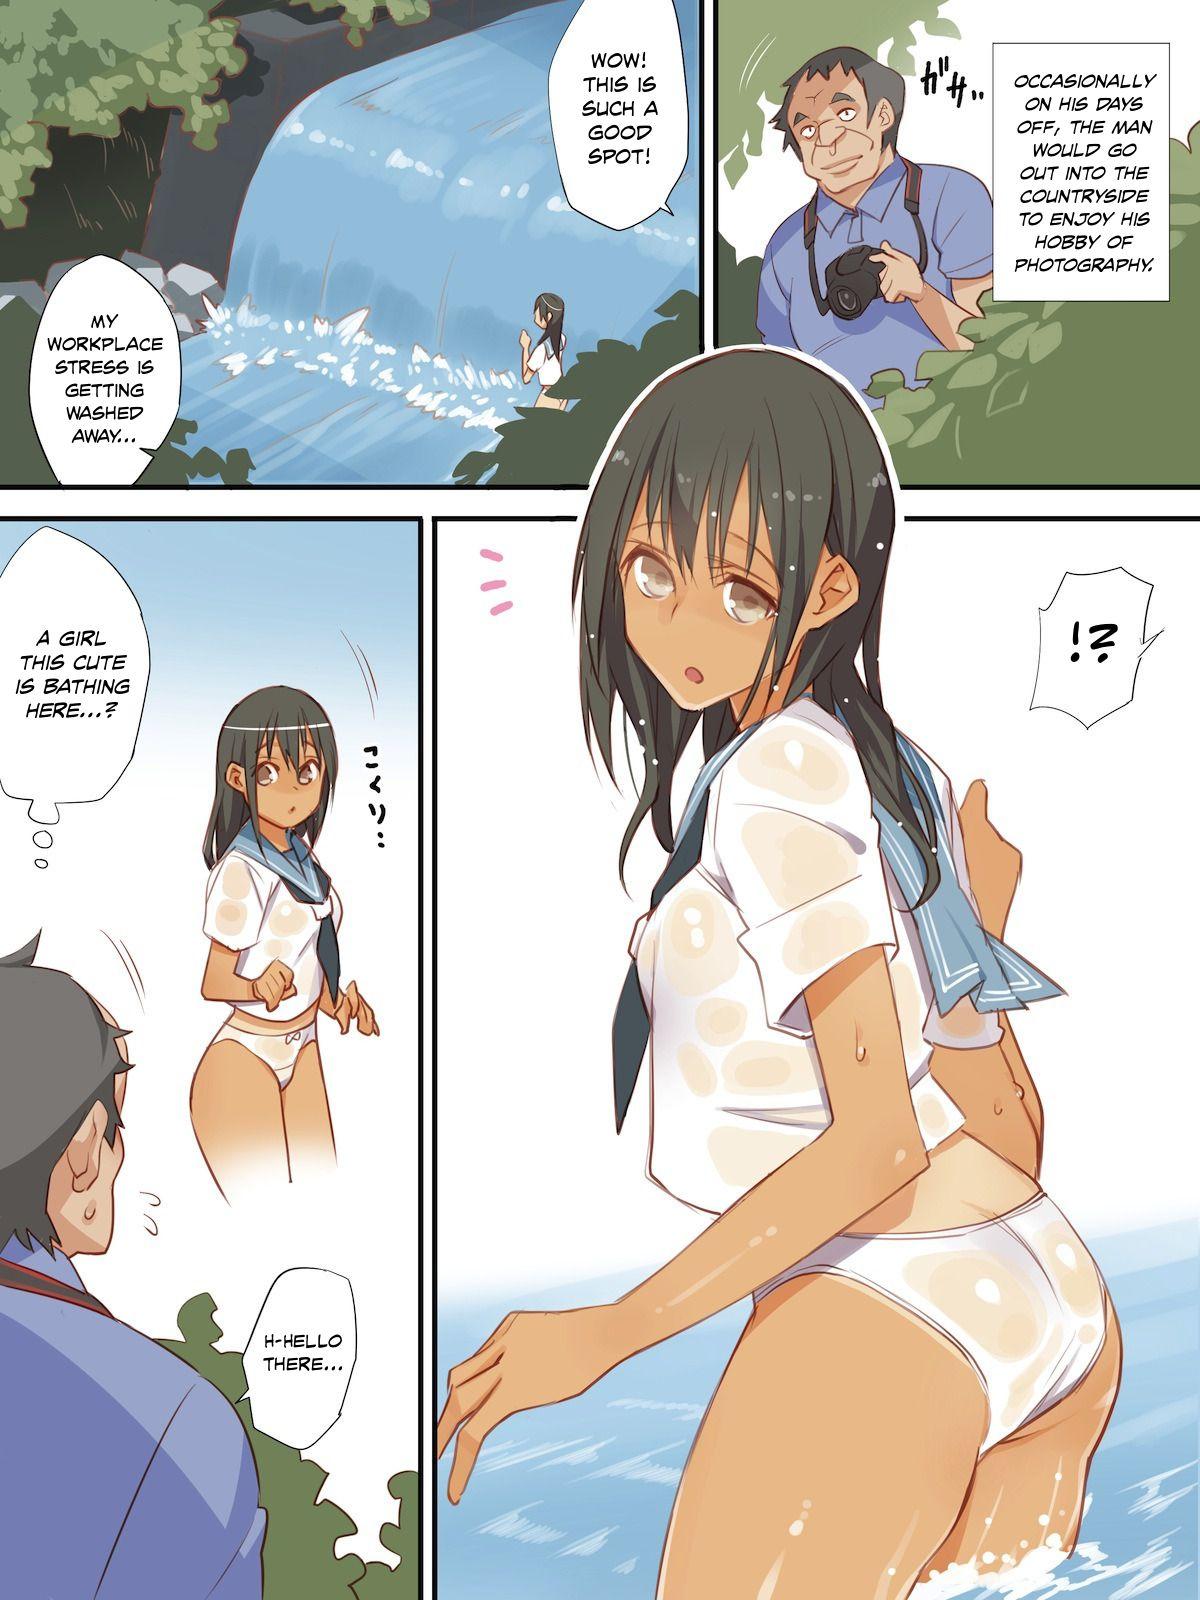 Milfs Inaka no Musume ga Sex o Oboetara | When Country Girls Learn About Sex Action - Page 2